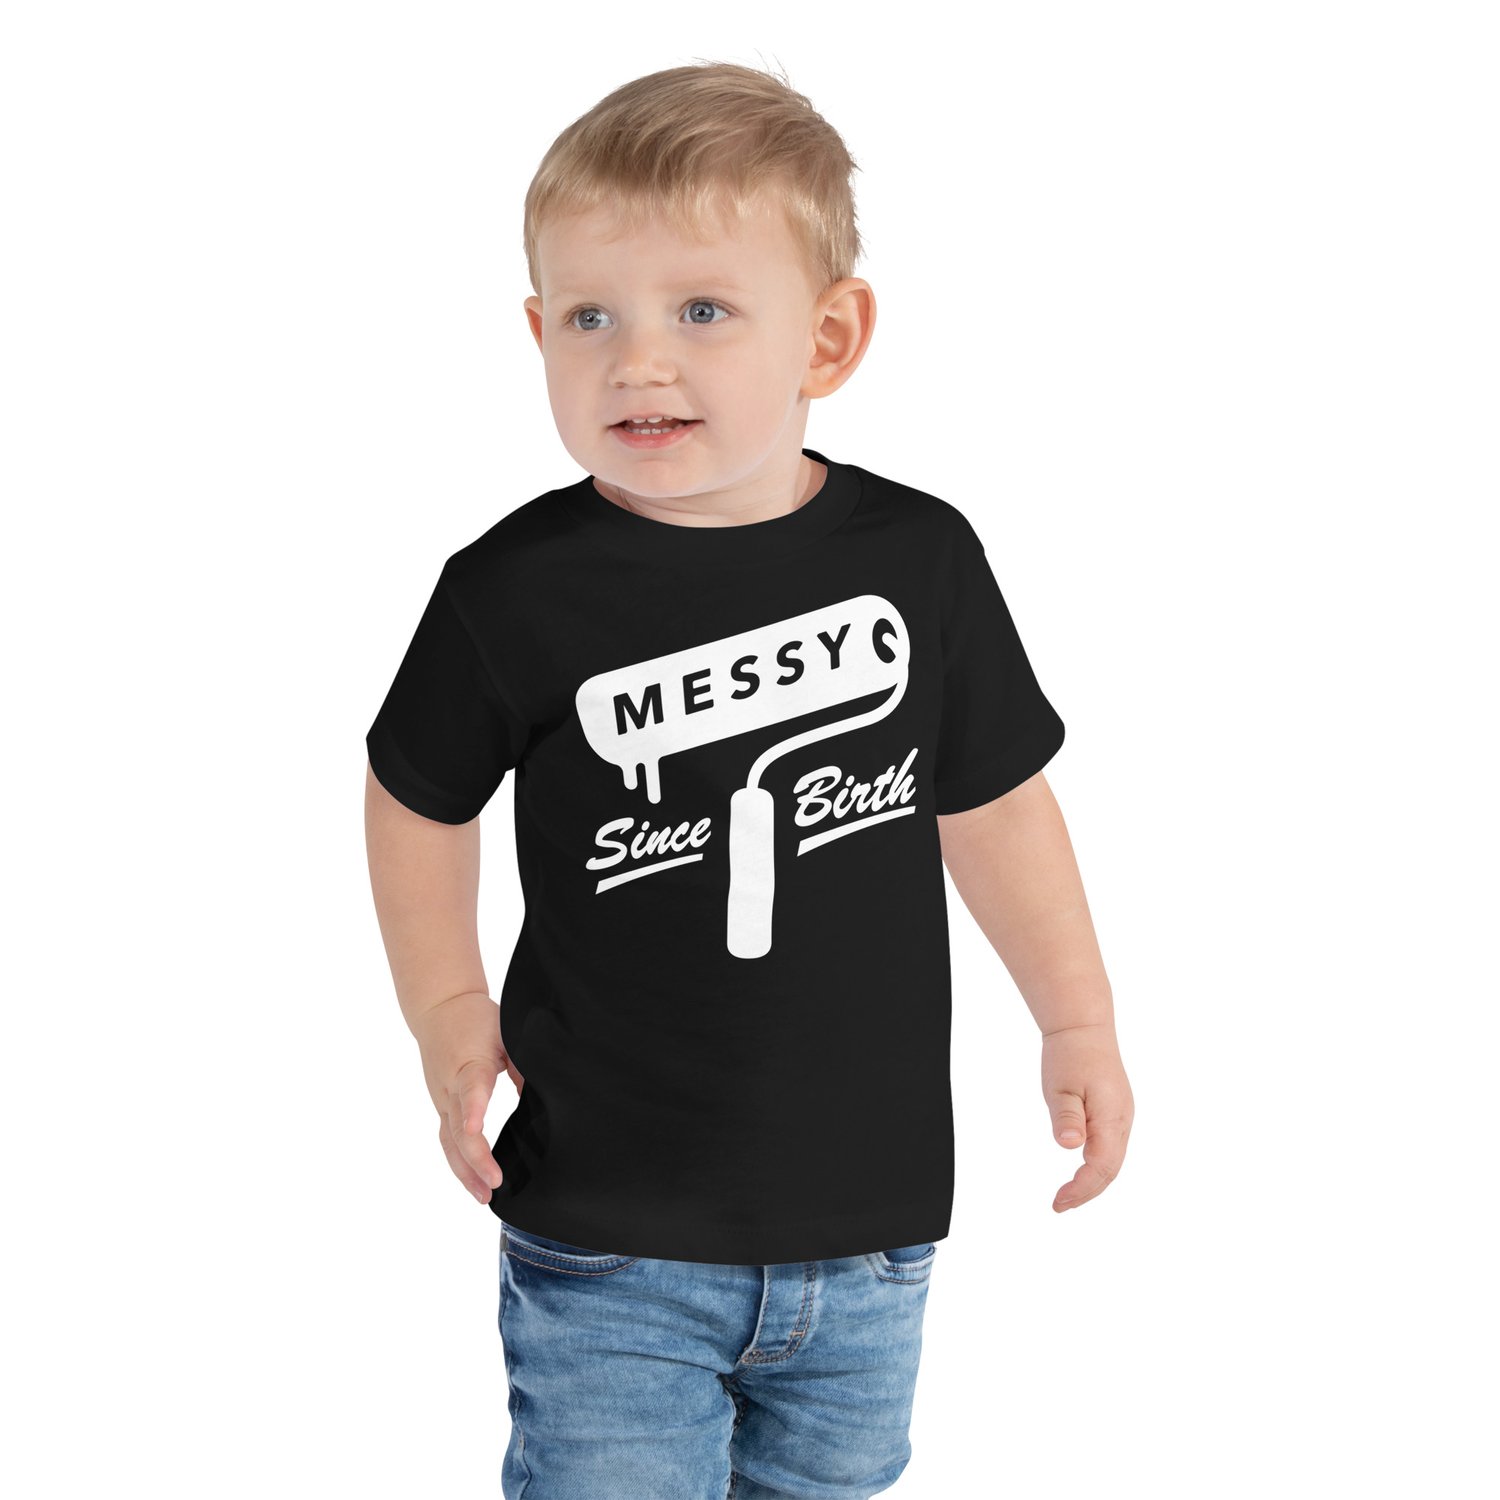 "Messy Since Birth" Toddler Tee